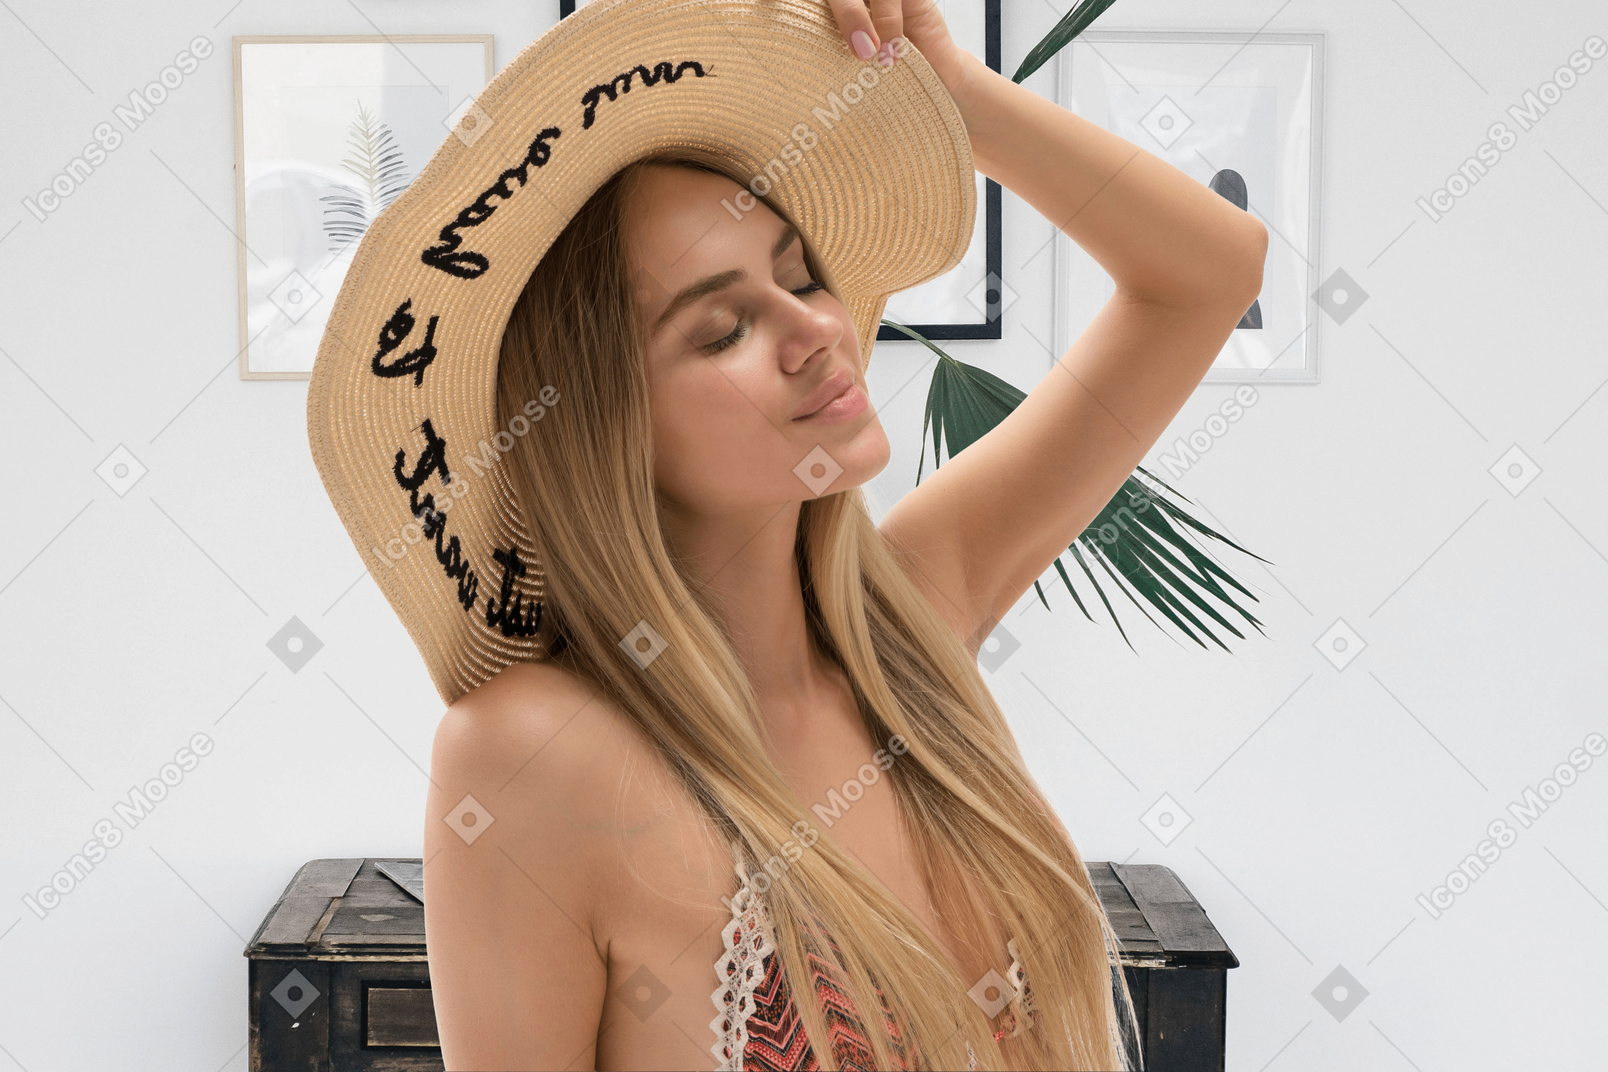 A woman wearing a straw hat with writing on it